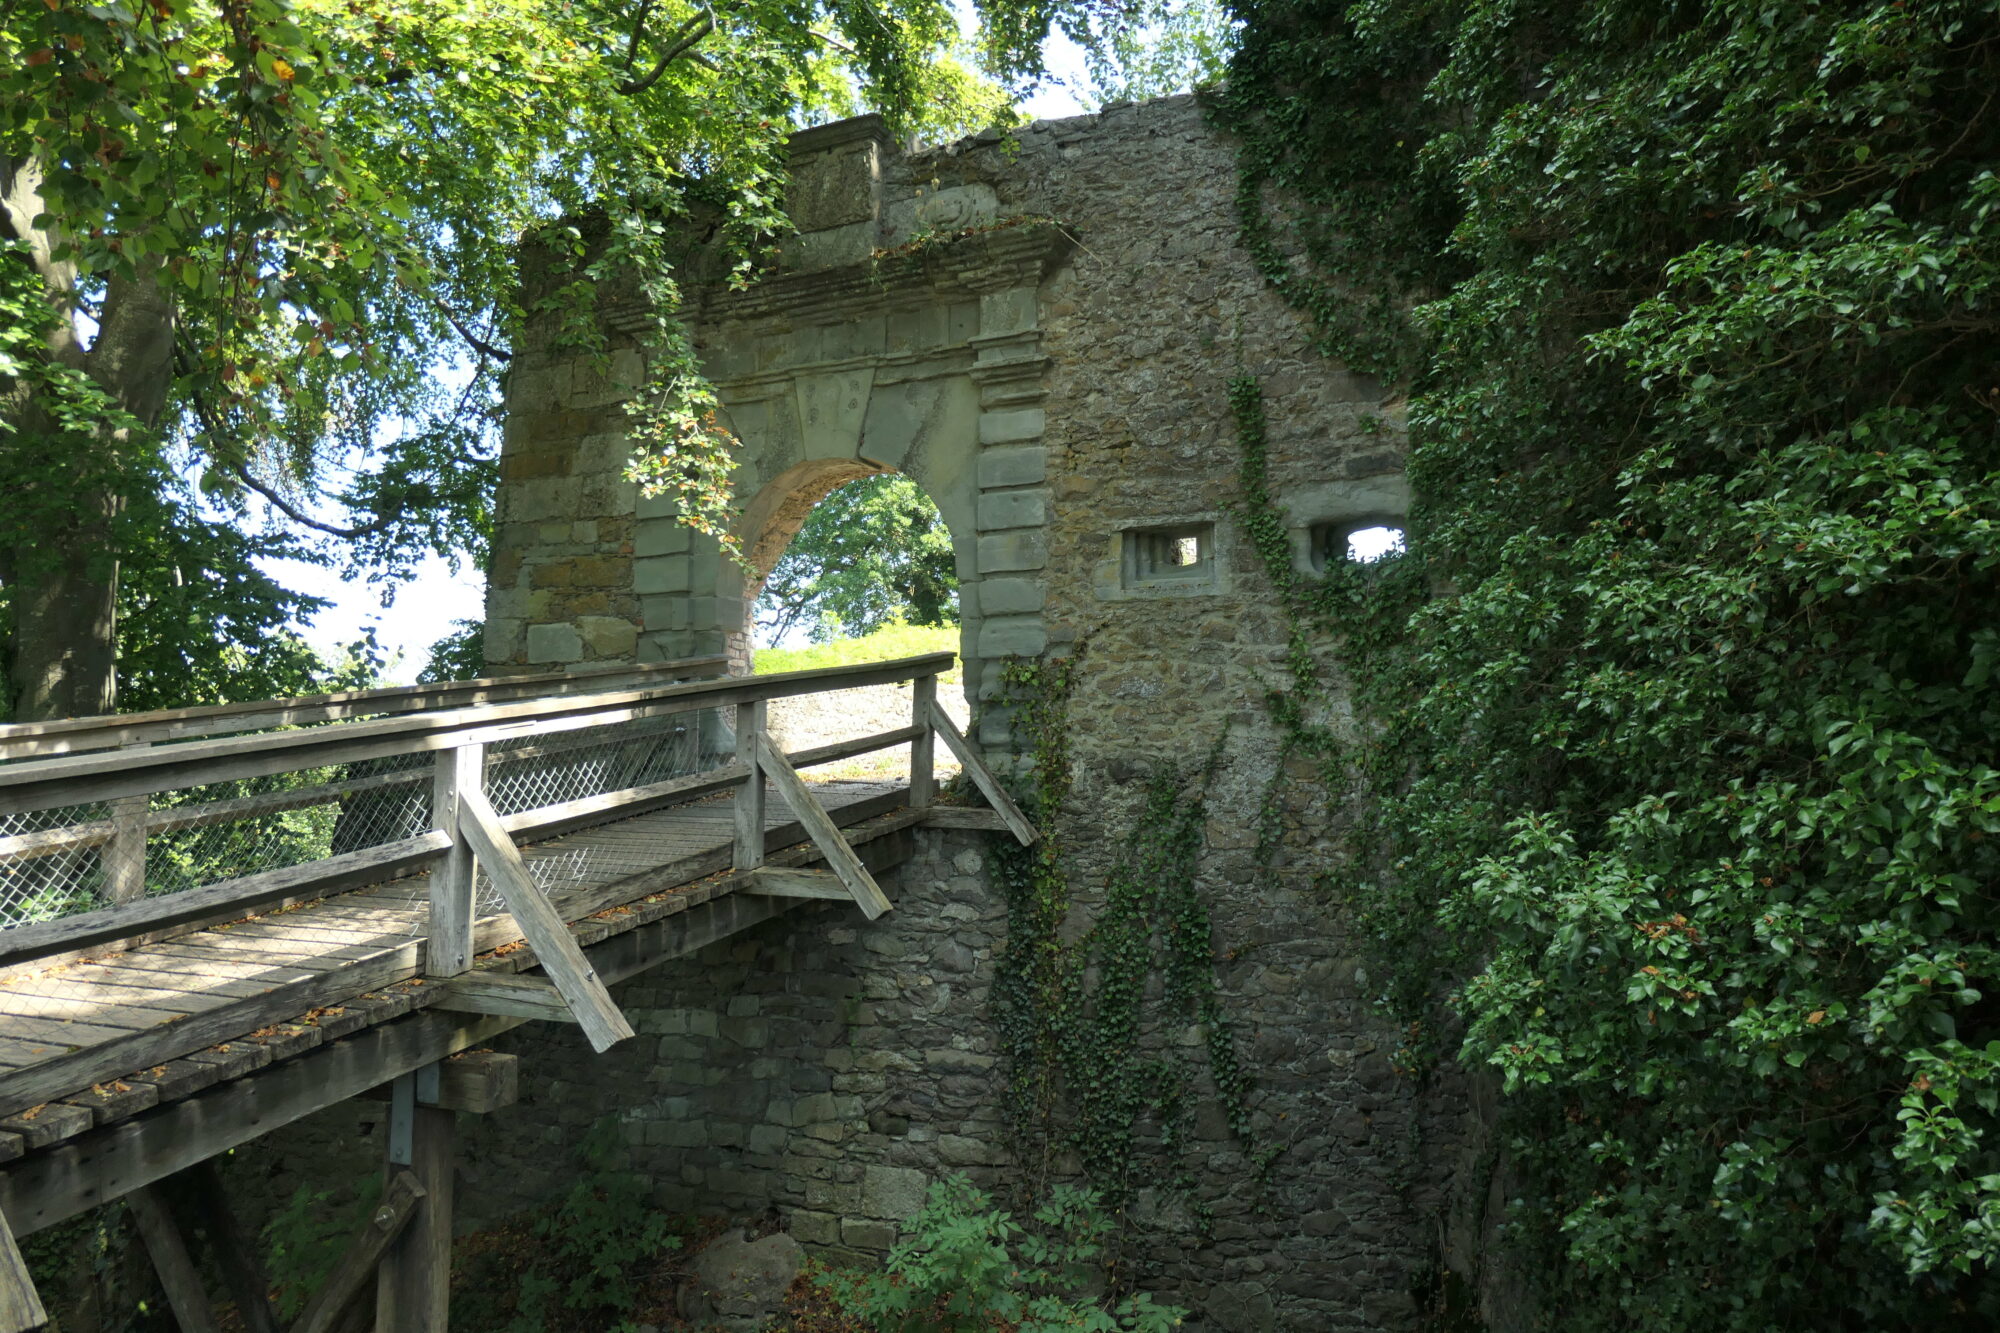 Gate in front of the captain's tower